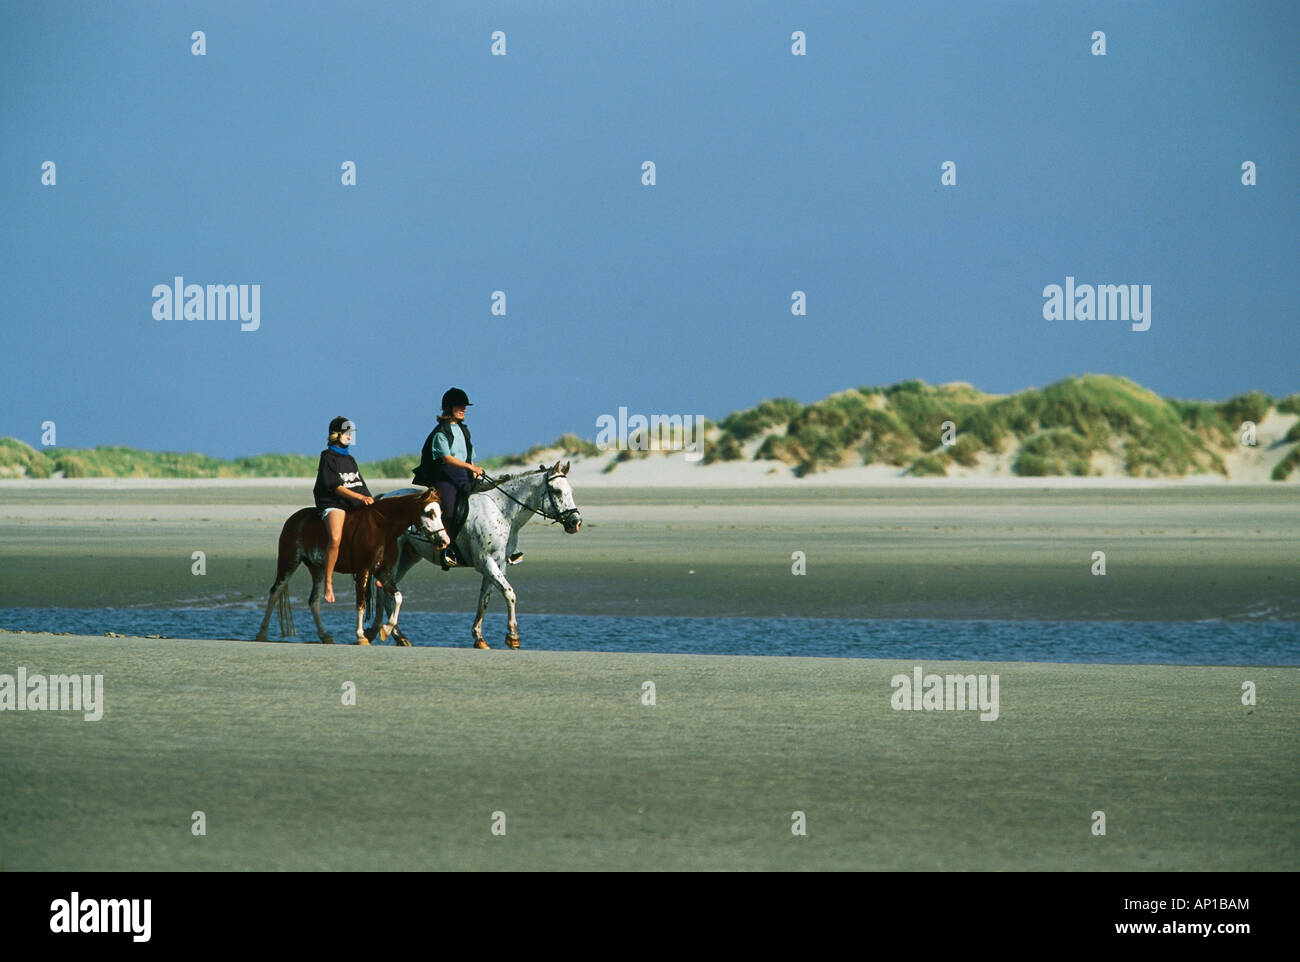 Riding on horses on the beach, Norderney Island, Germany Stock Photo